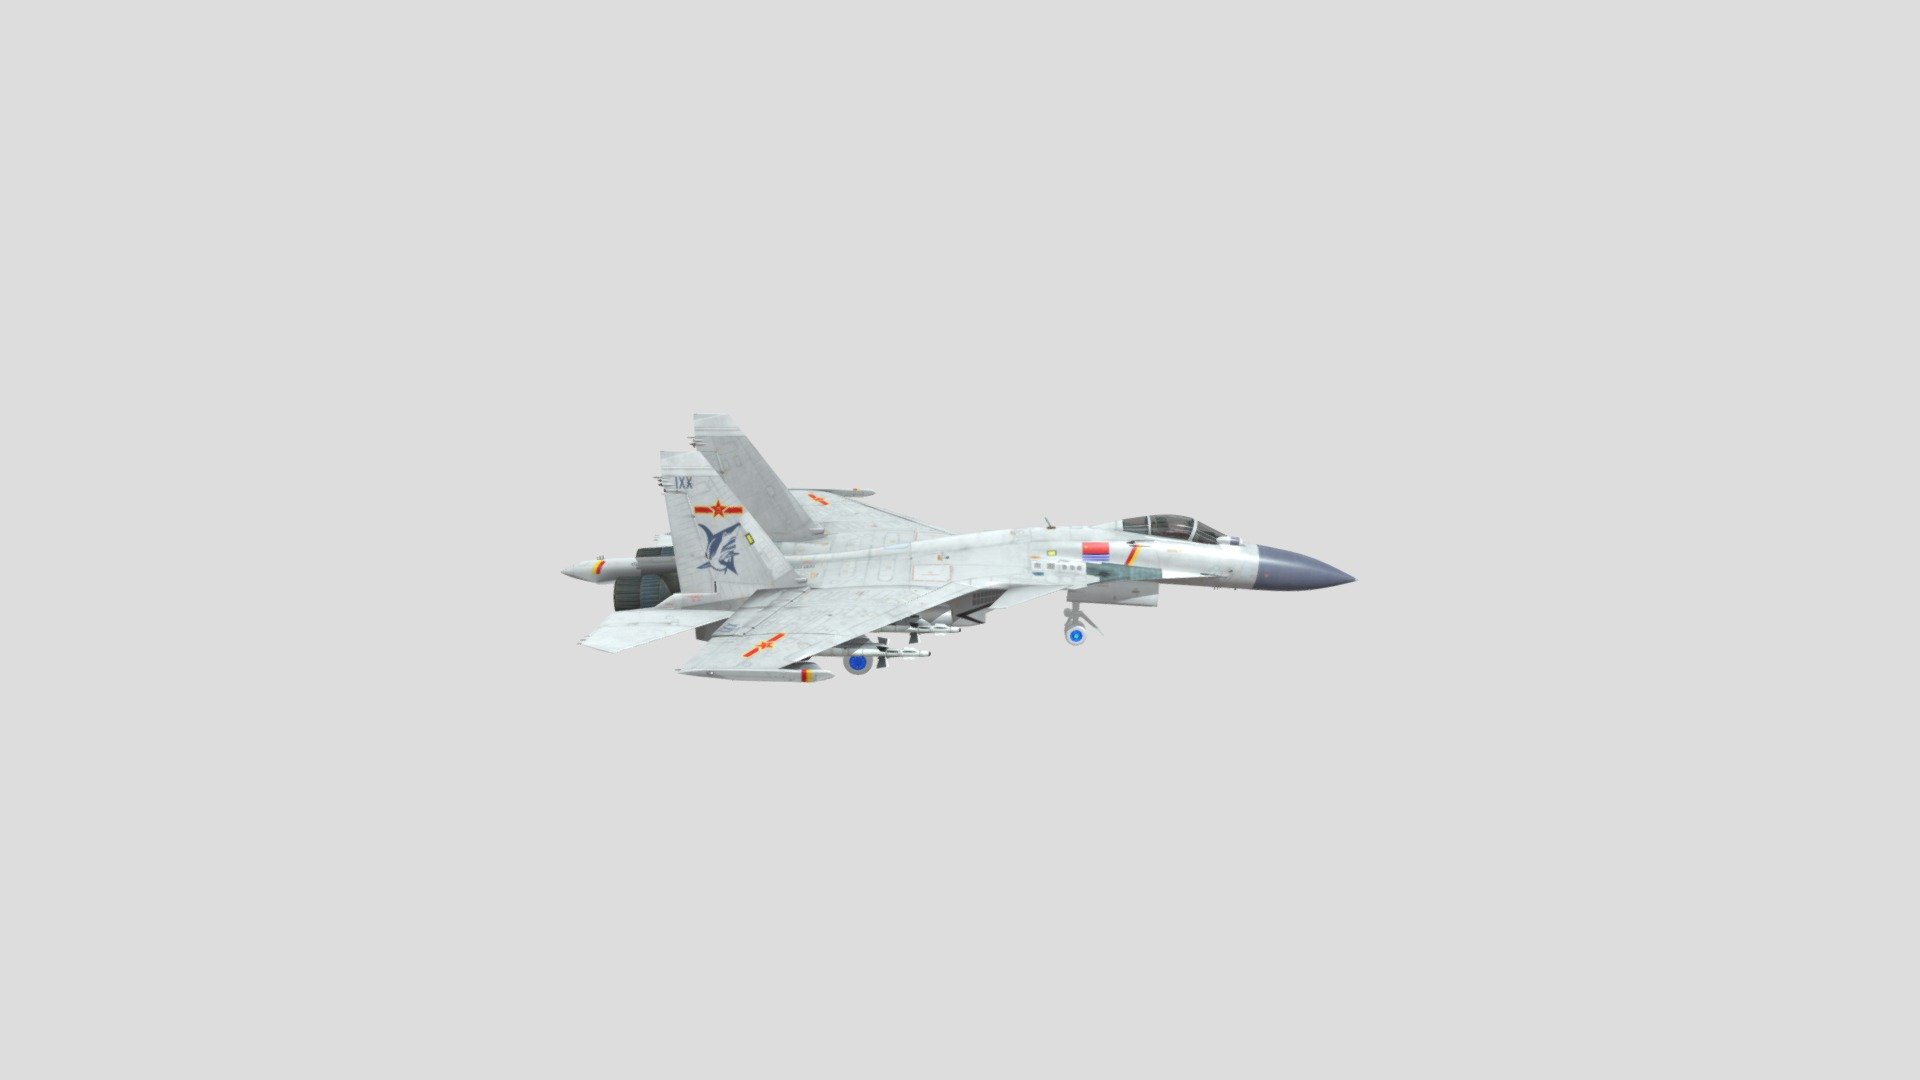 Prev Video: https://www.youtube.com/watch?v=bClYgcE1xjw&amp;t=43s

Rigged Animated Sukhoi-37 Terminator Flanker is originally created with 3ds max2020

Mainly used for game, film, visual effects, animation

High-res textures, 8K x 4K

Su-33MK, Su27, Su35, Su30, 歼-15，飞鲨

included 3dmax 2017 - Su-37 Terminator Flanker or PLA J-15 - 3D model by timonfreud 3d model